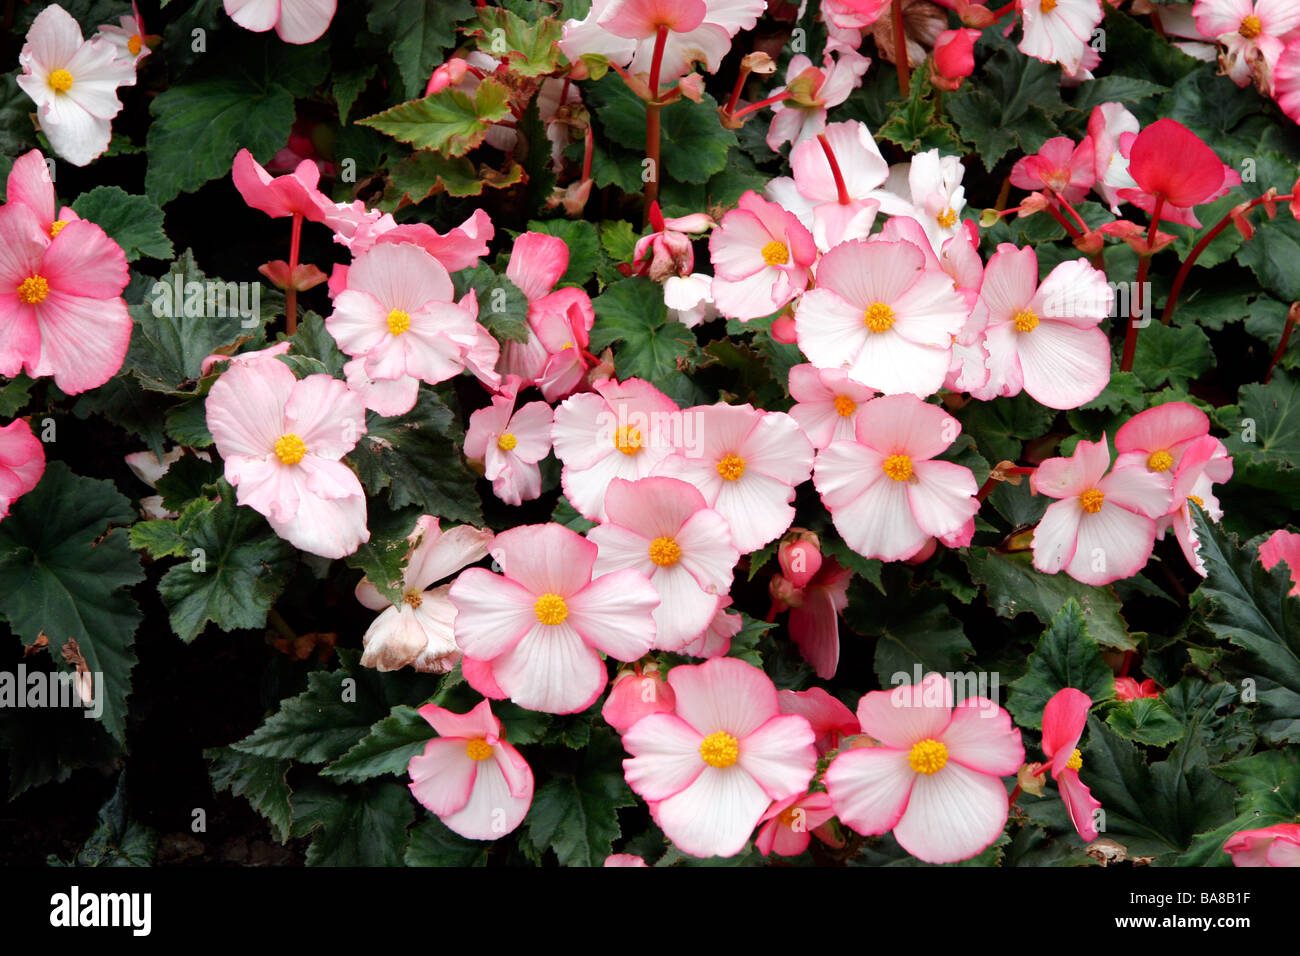 A mass of pink Begonia flowers at Butchart Gardens Stock Photo